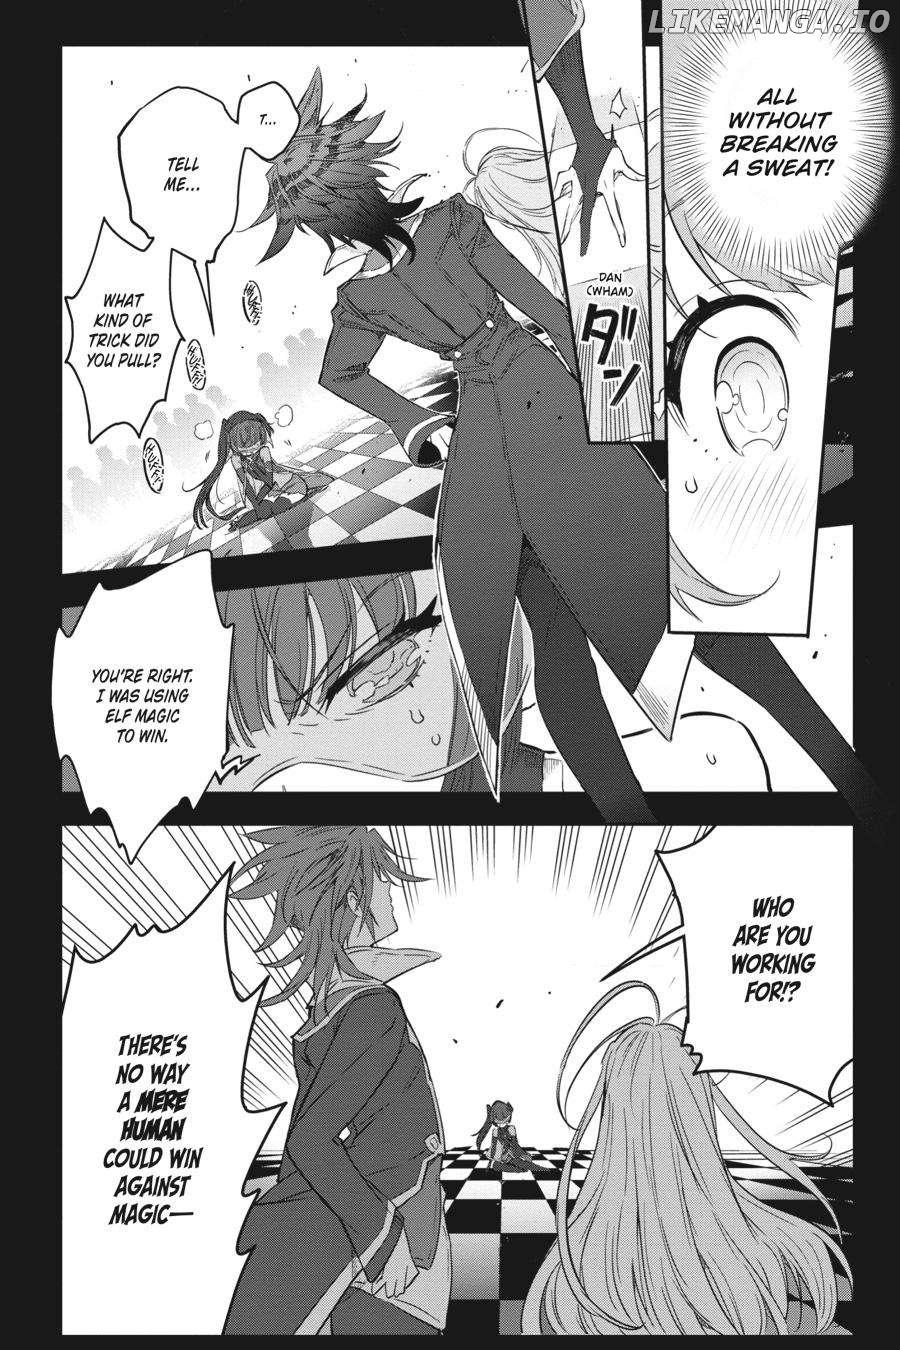 No Game No Life Chapter 2 - Eastern Union Arc Chapter 1 - page 38